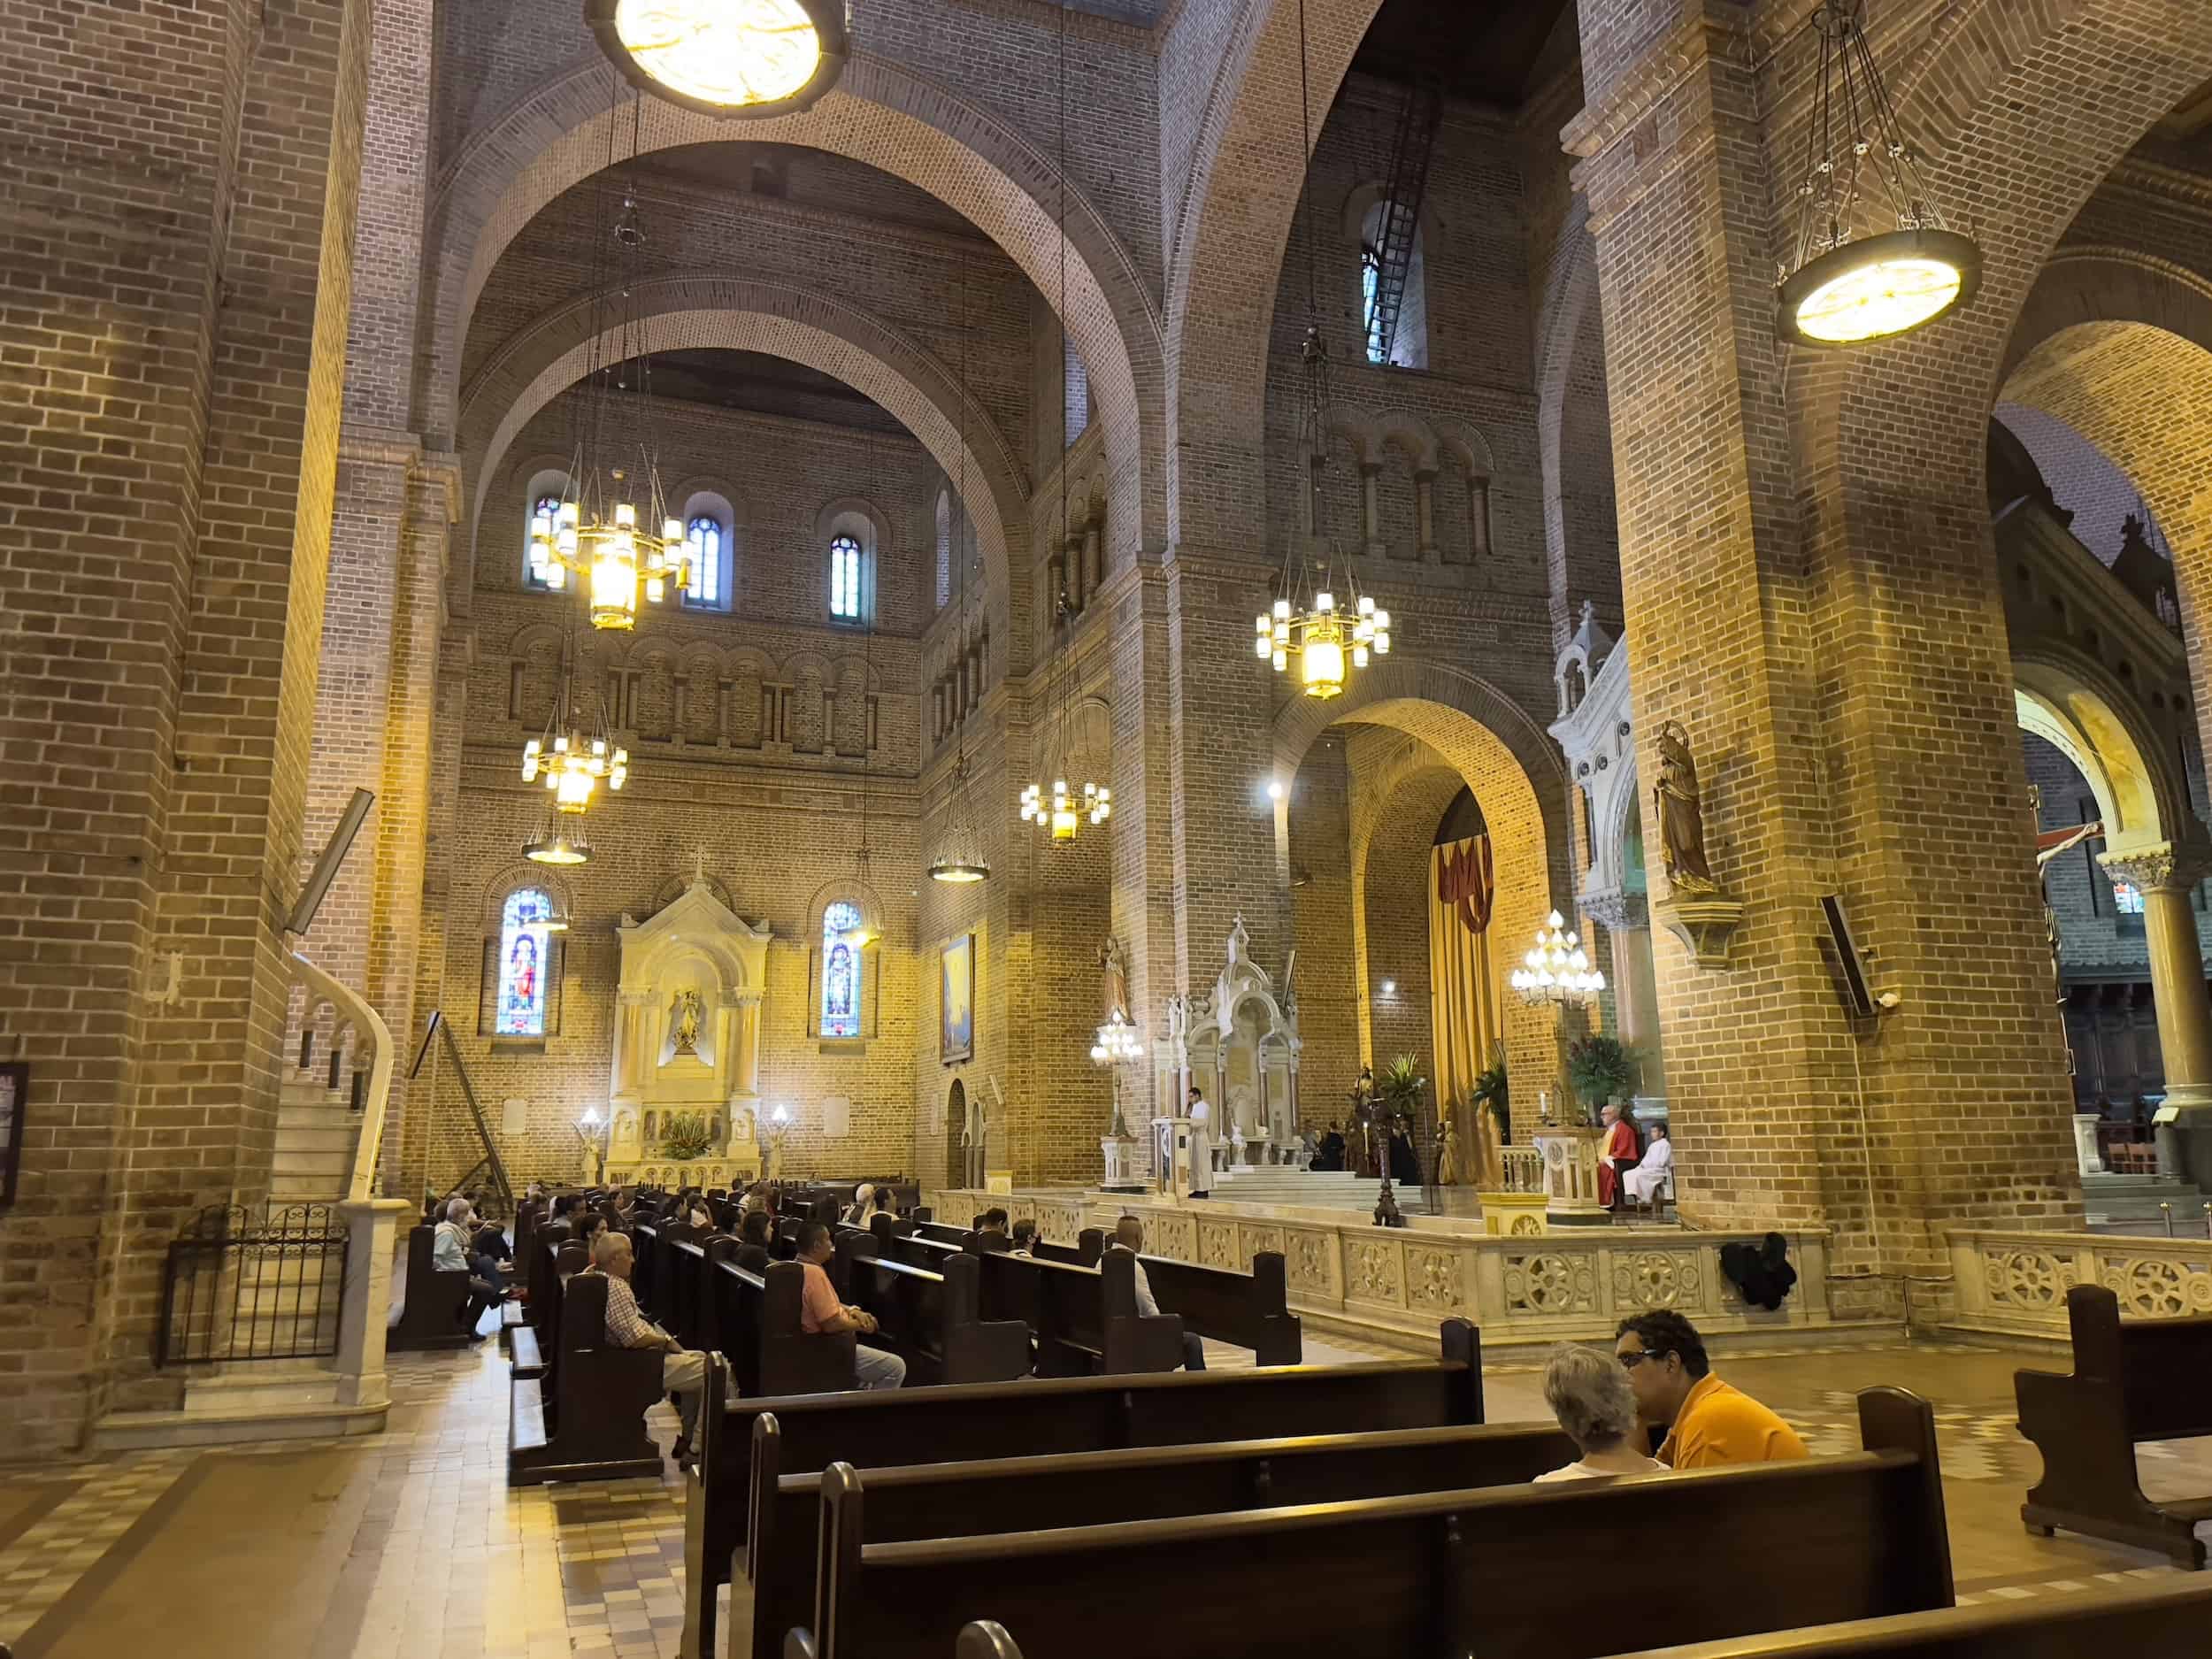 Transept looking west in the Metropolitan Cathedral in Medellín, Antioquia, Colombia